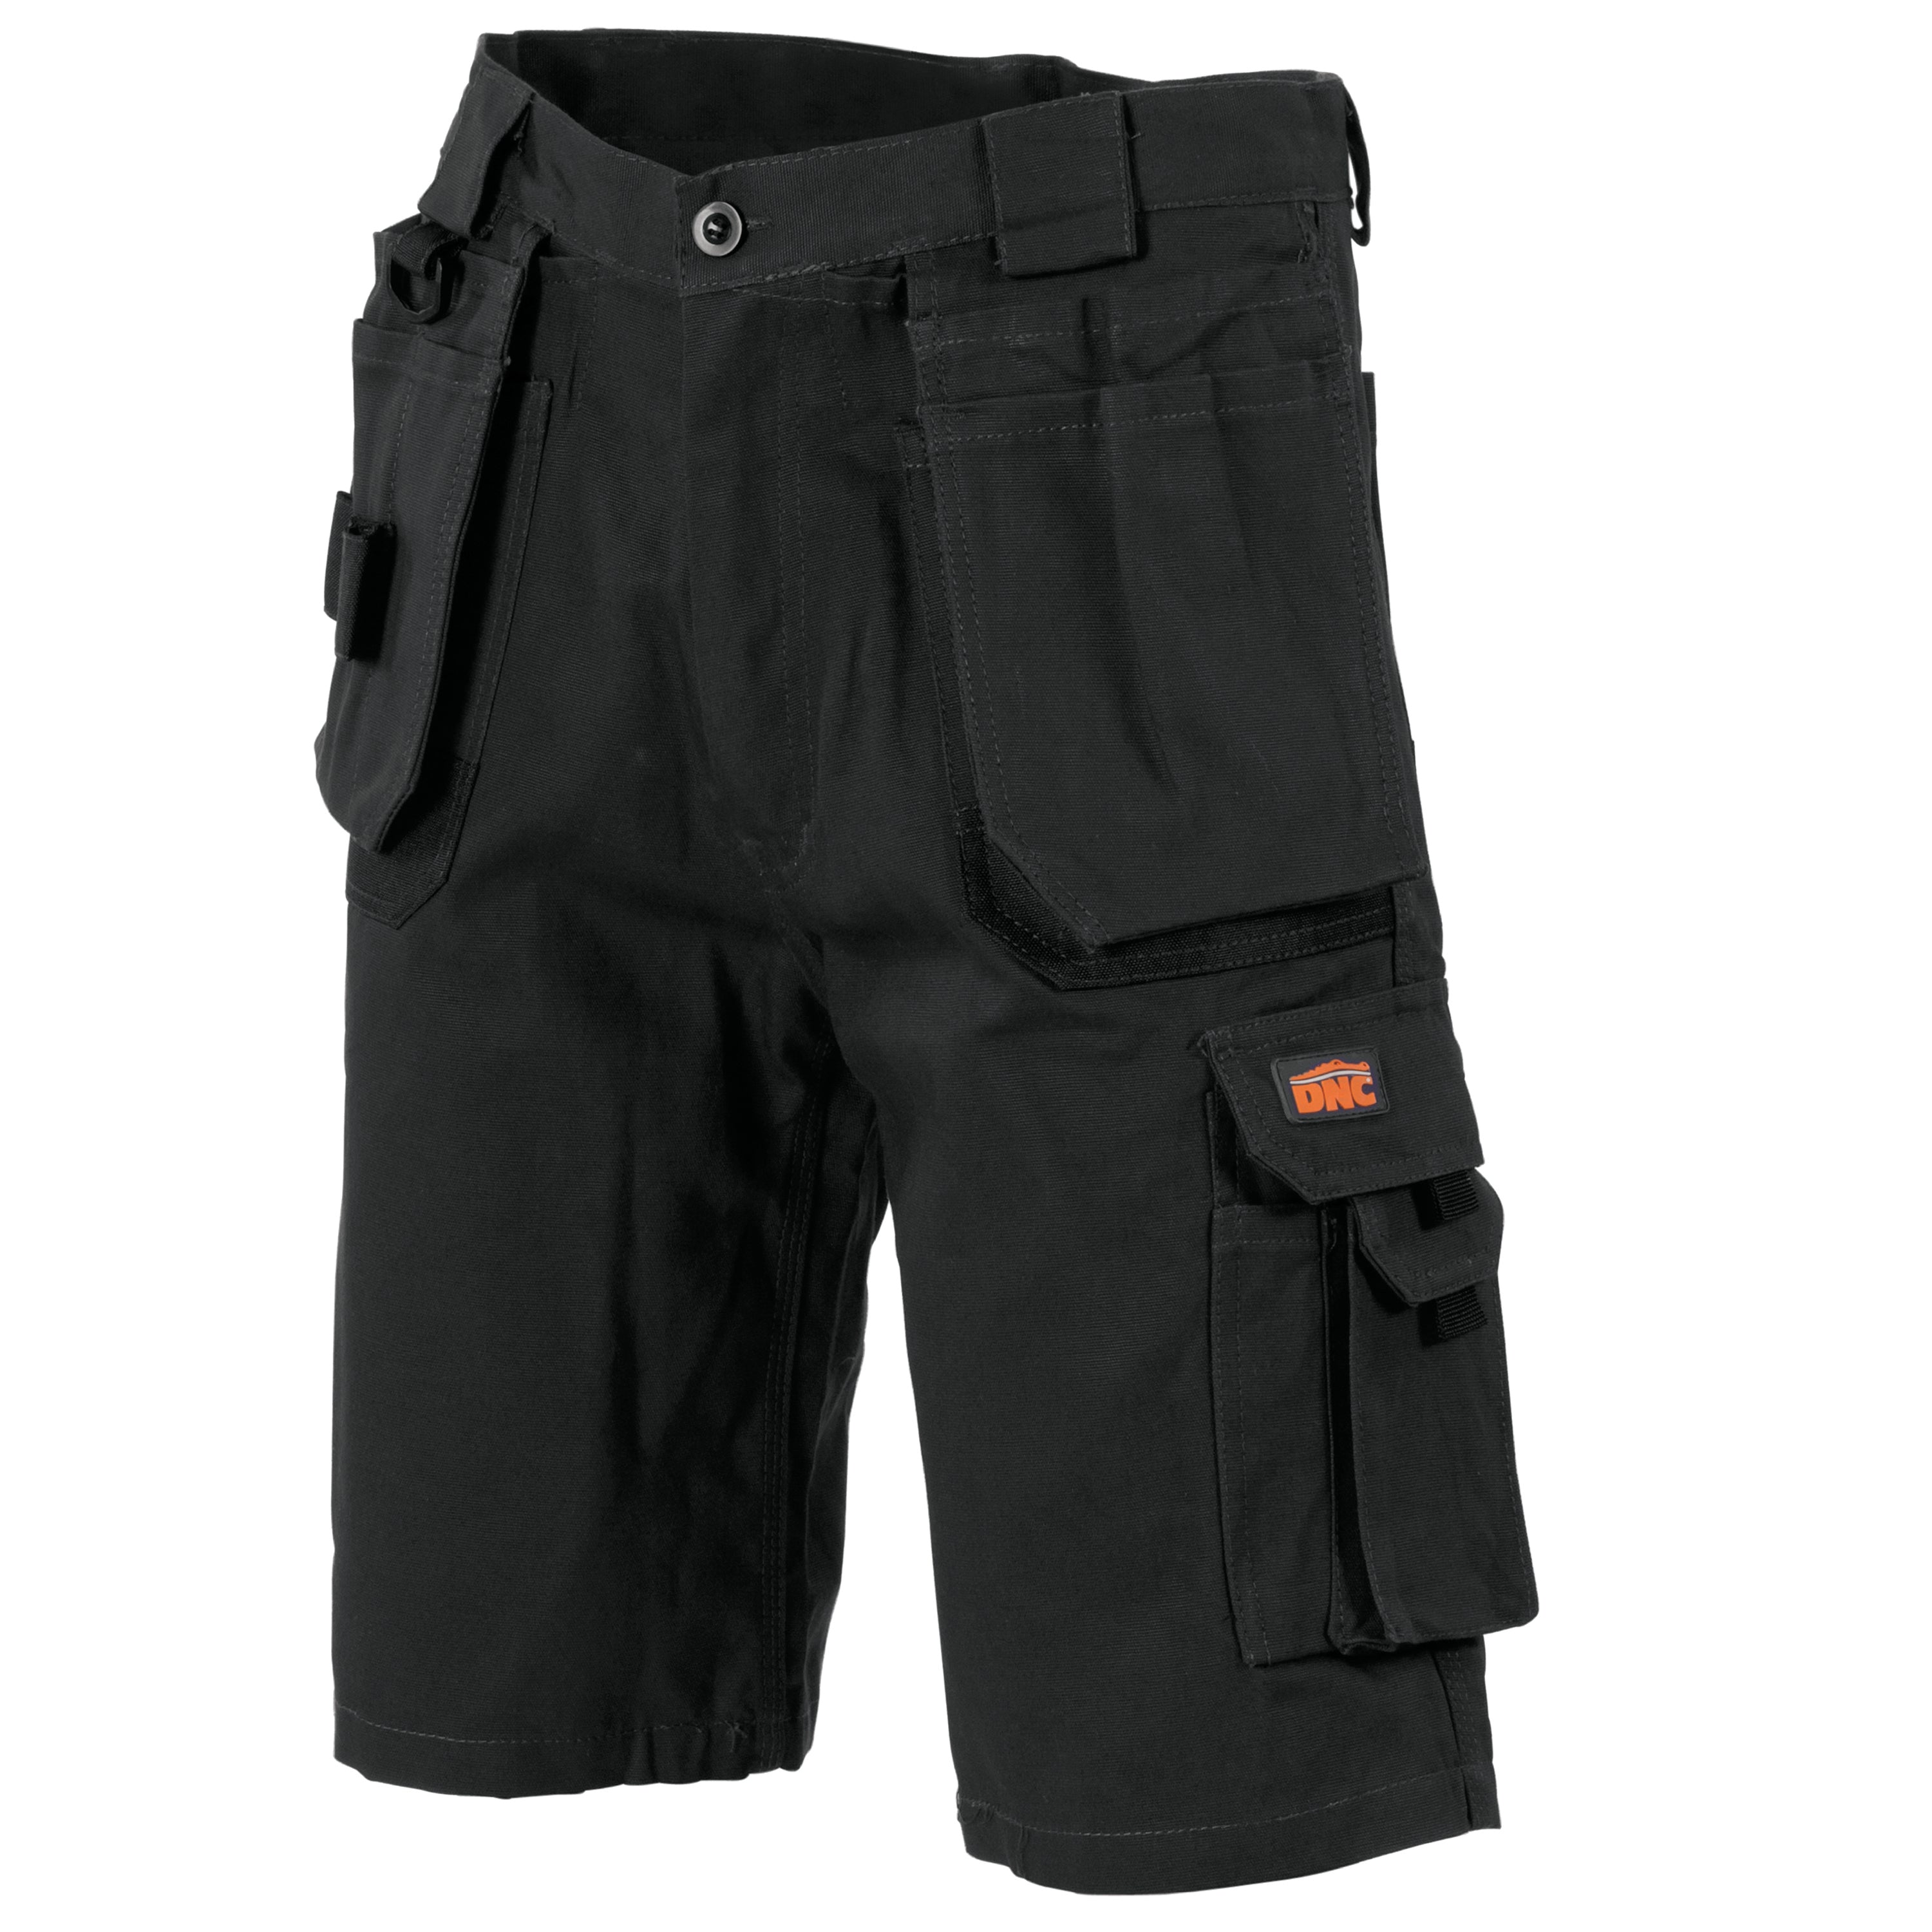 DNC 3336 Duratex Cotton Duck Weave Tradies Cargo Shorts with Tool Pocket